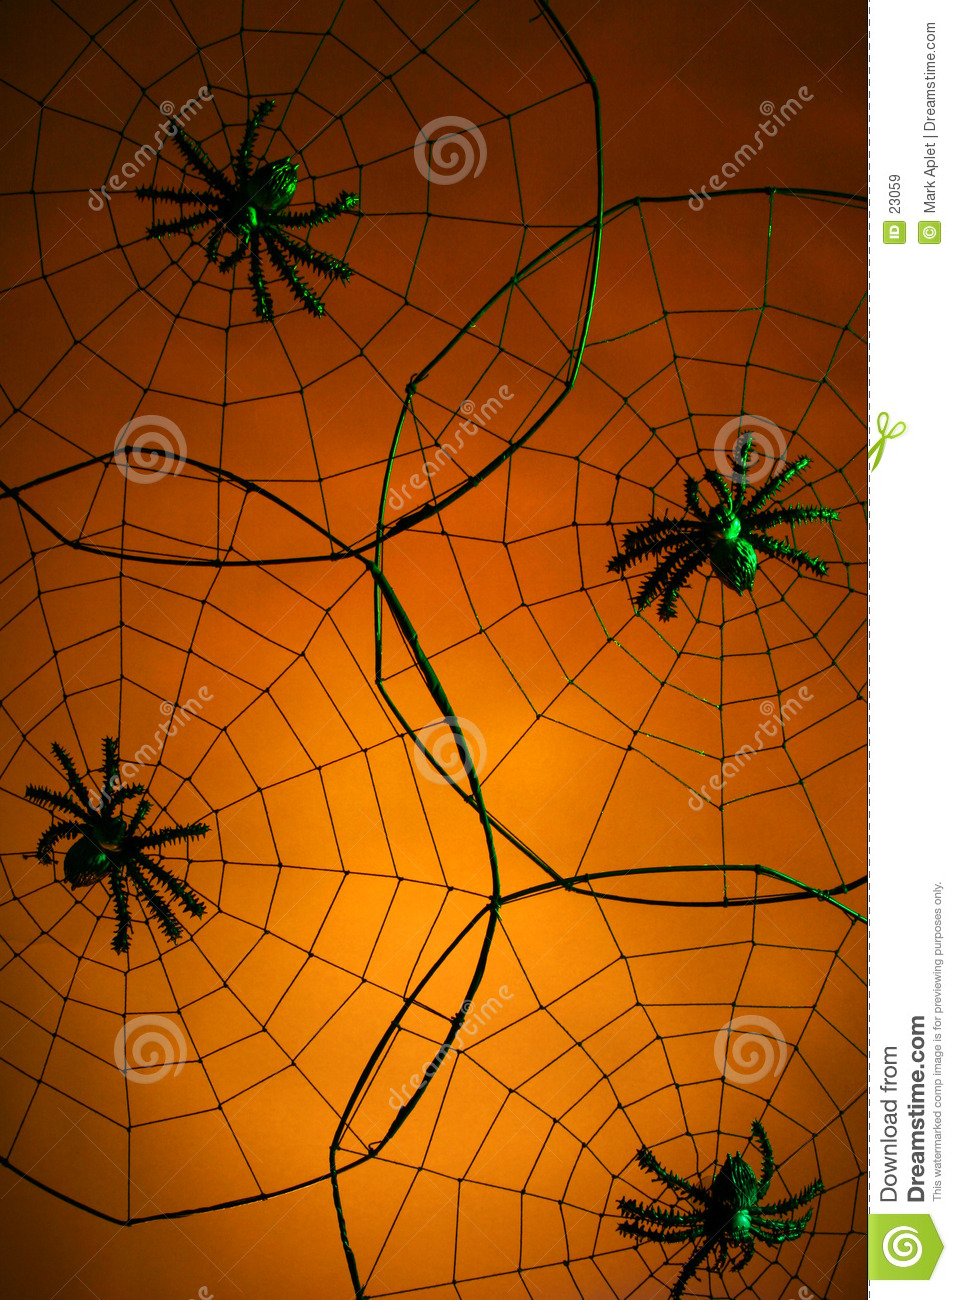 Creepy Spiders Royalty Free Stock Images   Image  23059